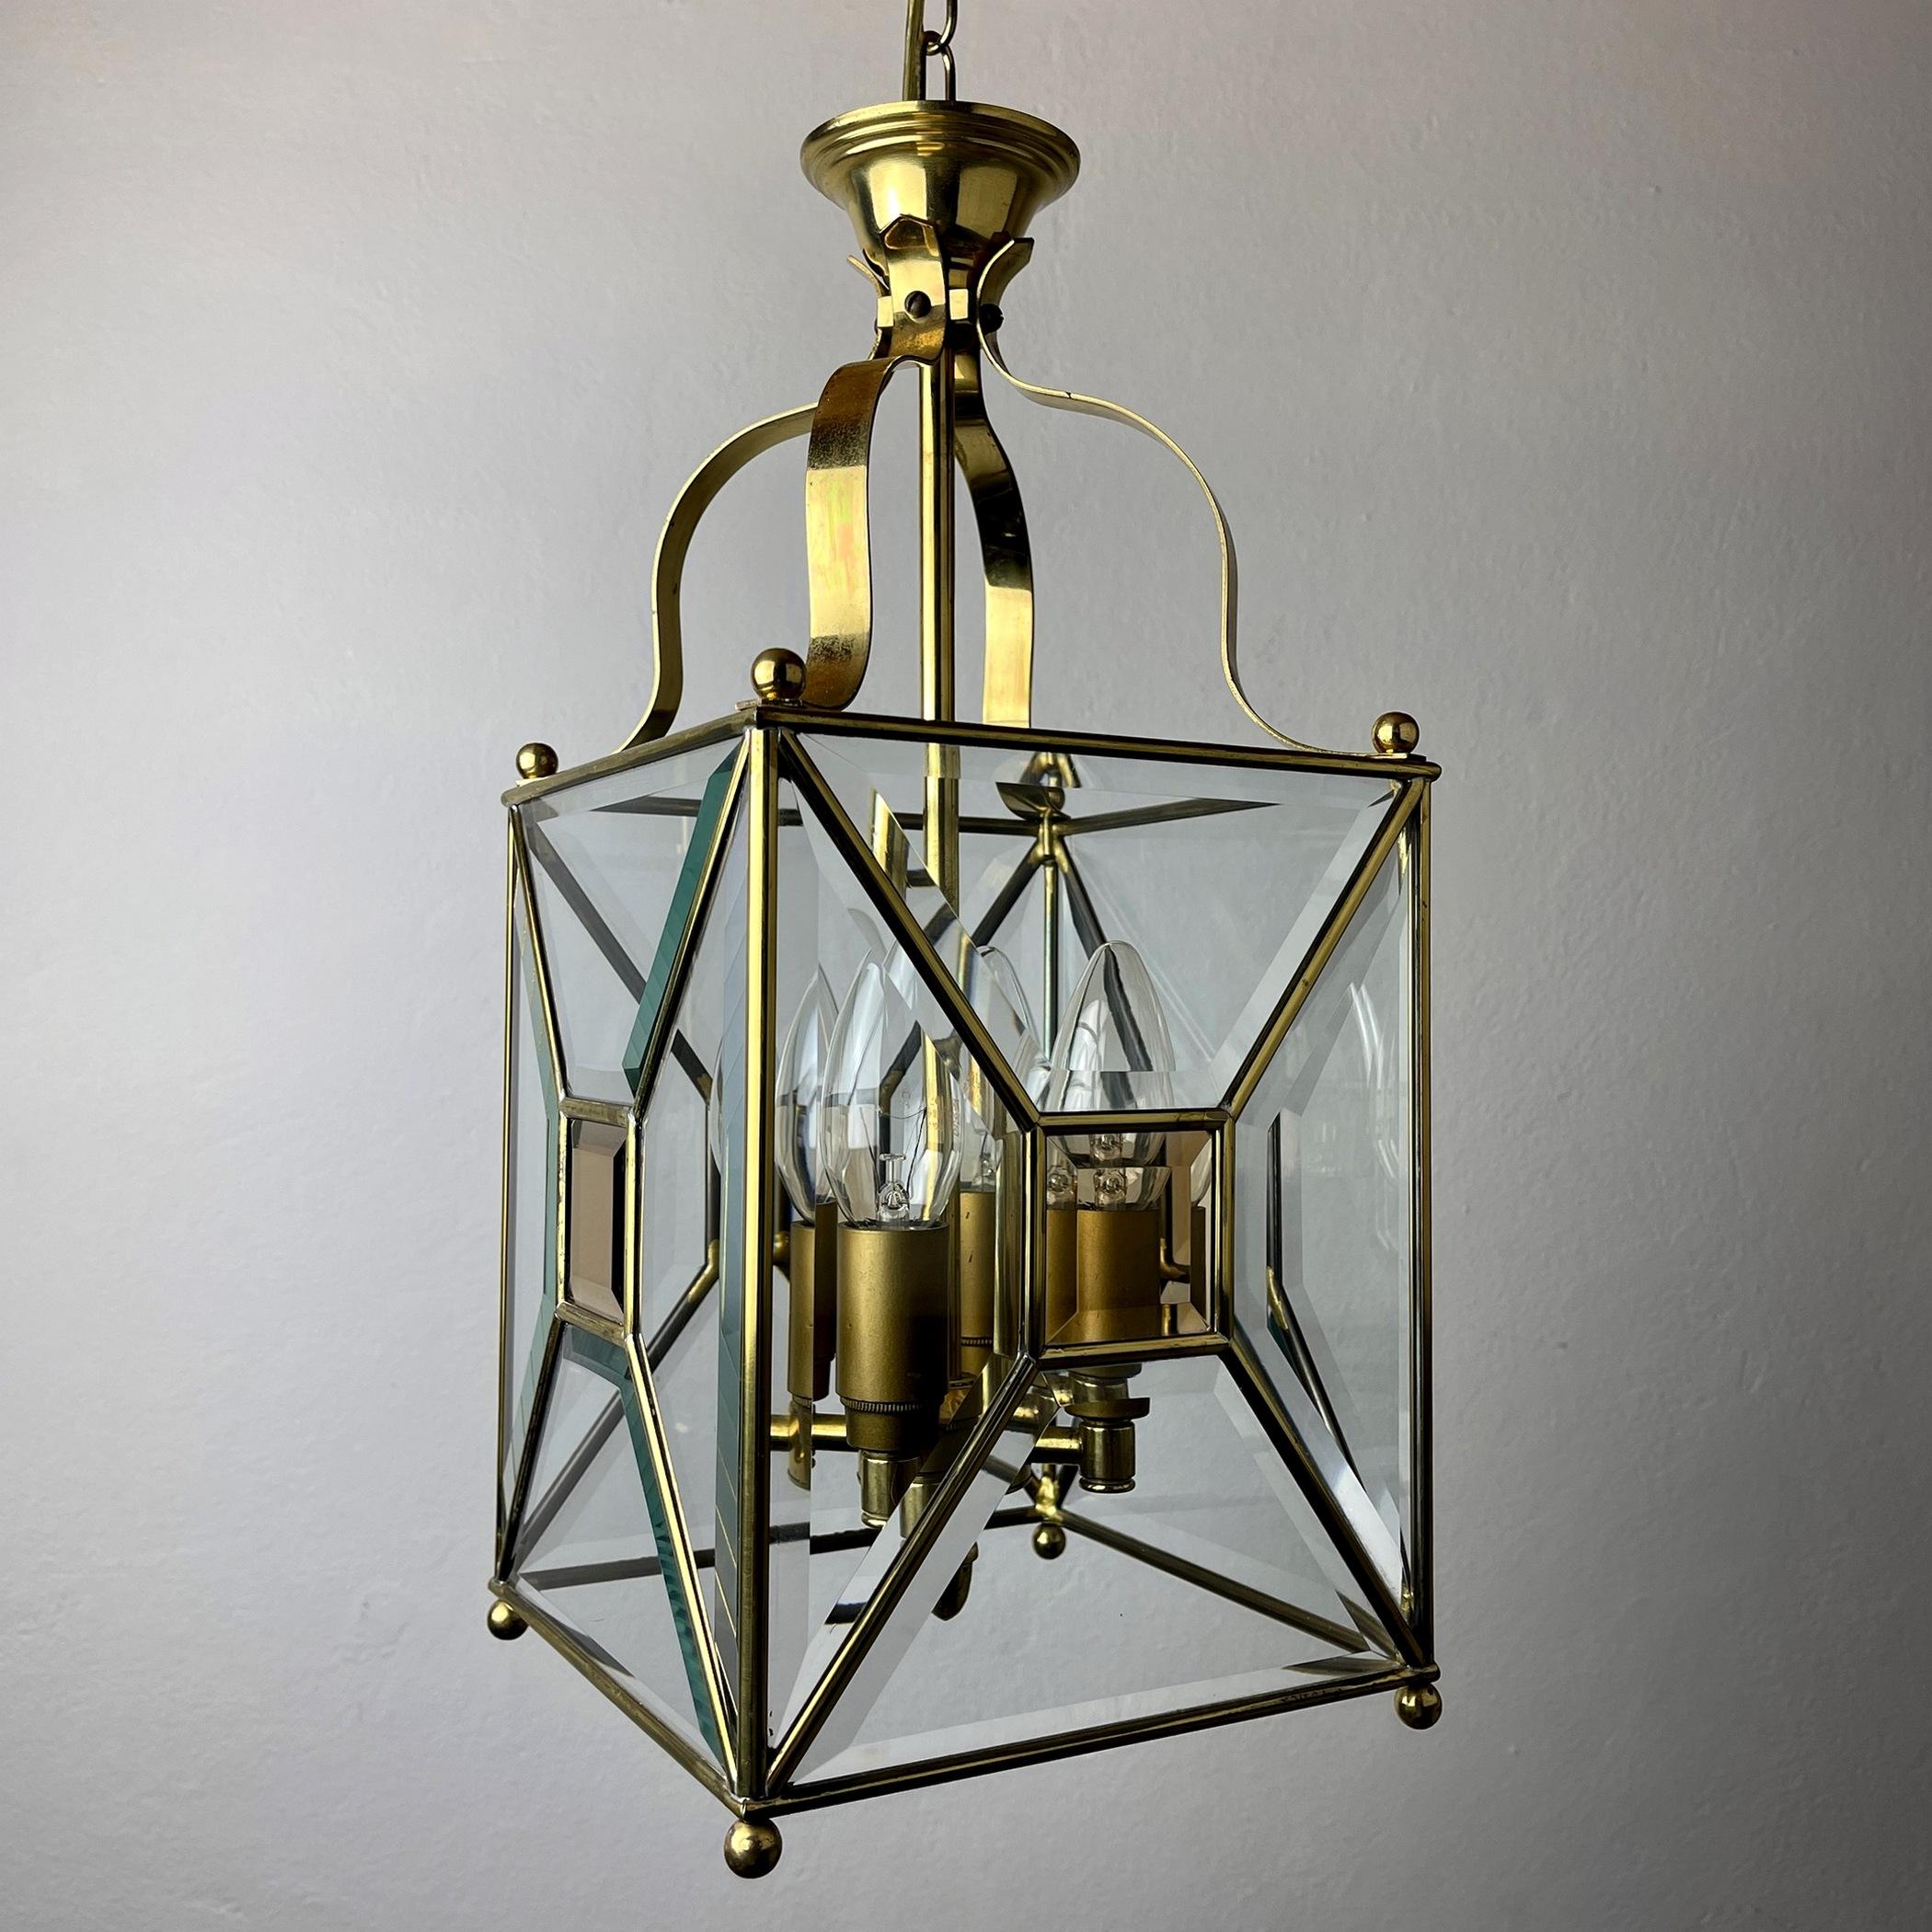 Vintage pendant lamp Italy '60s Brass Polished Glass Retro lighting Mid-century  For Sale 3